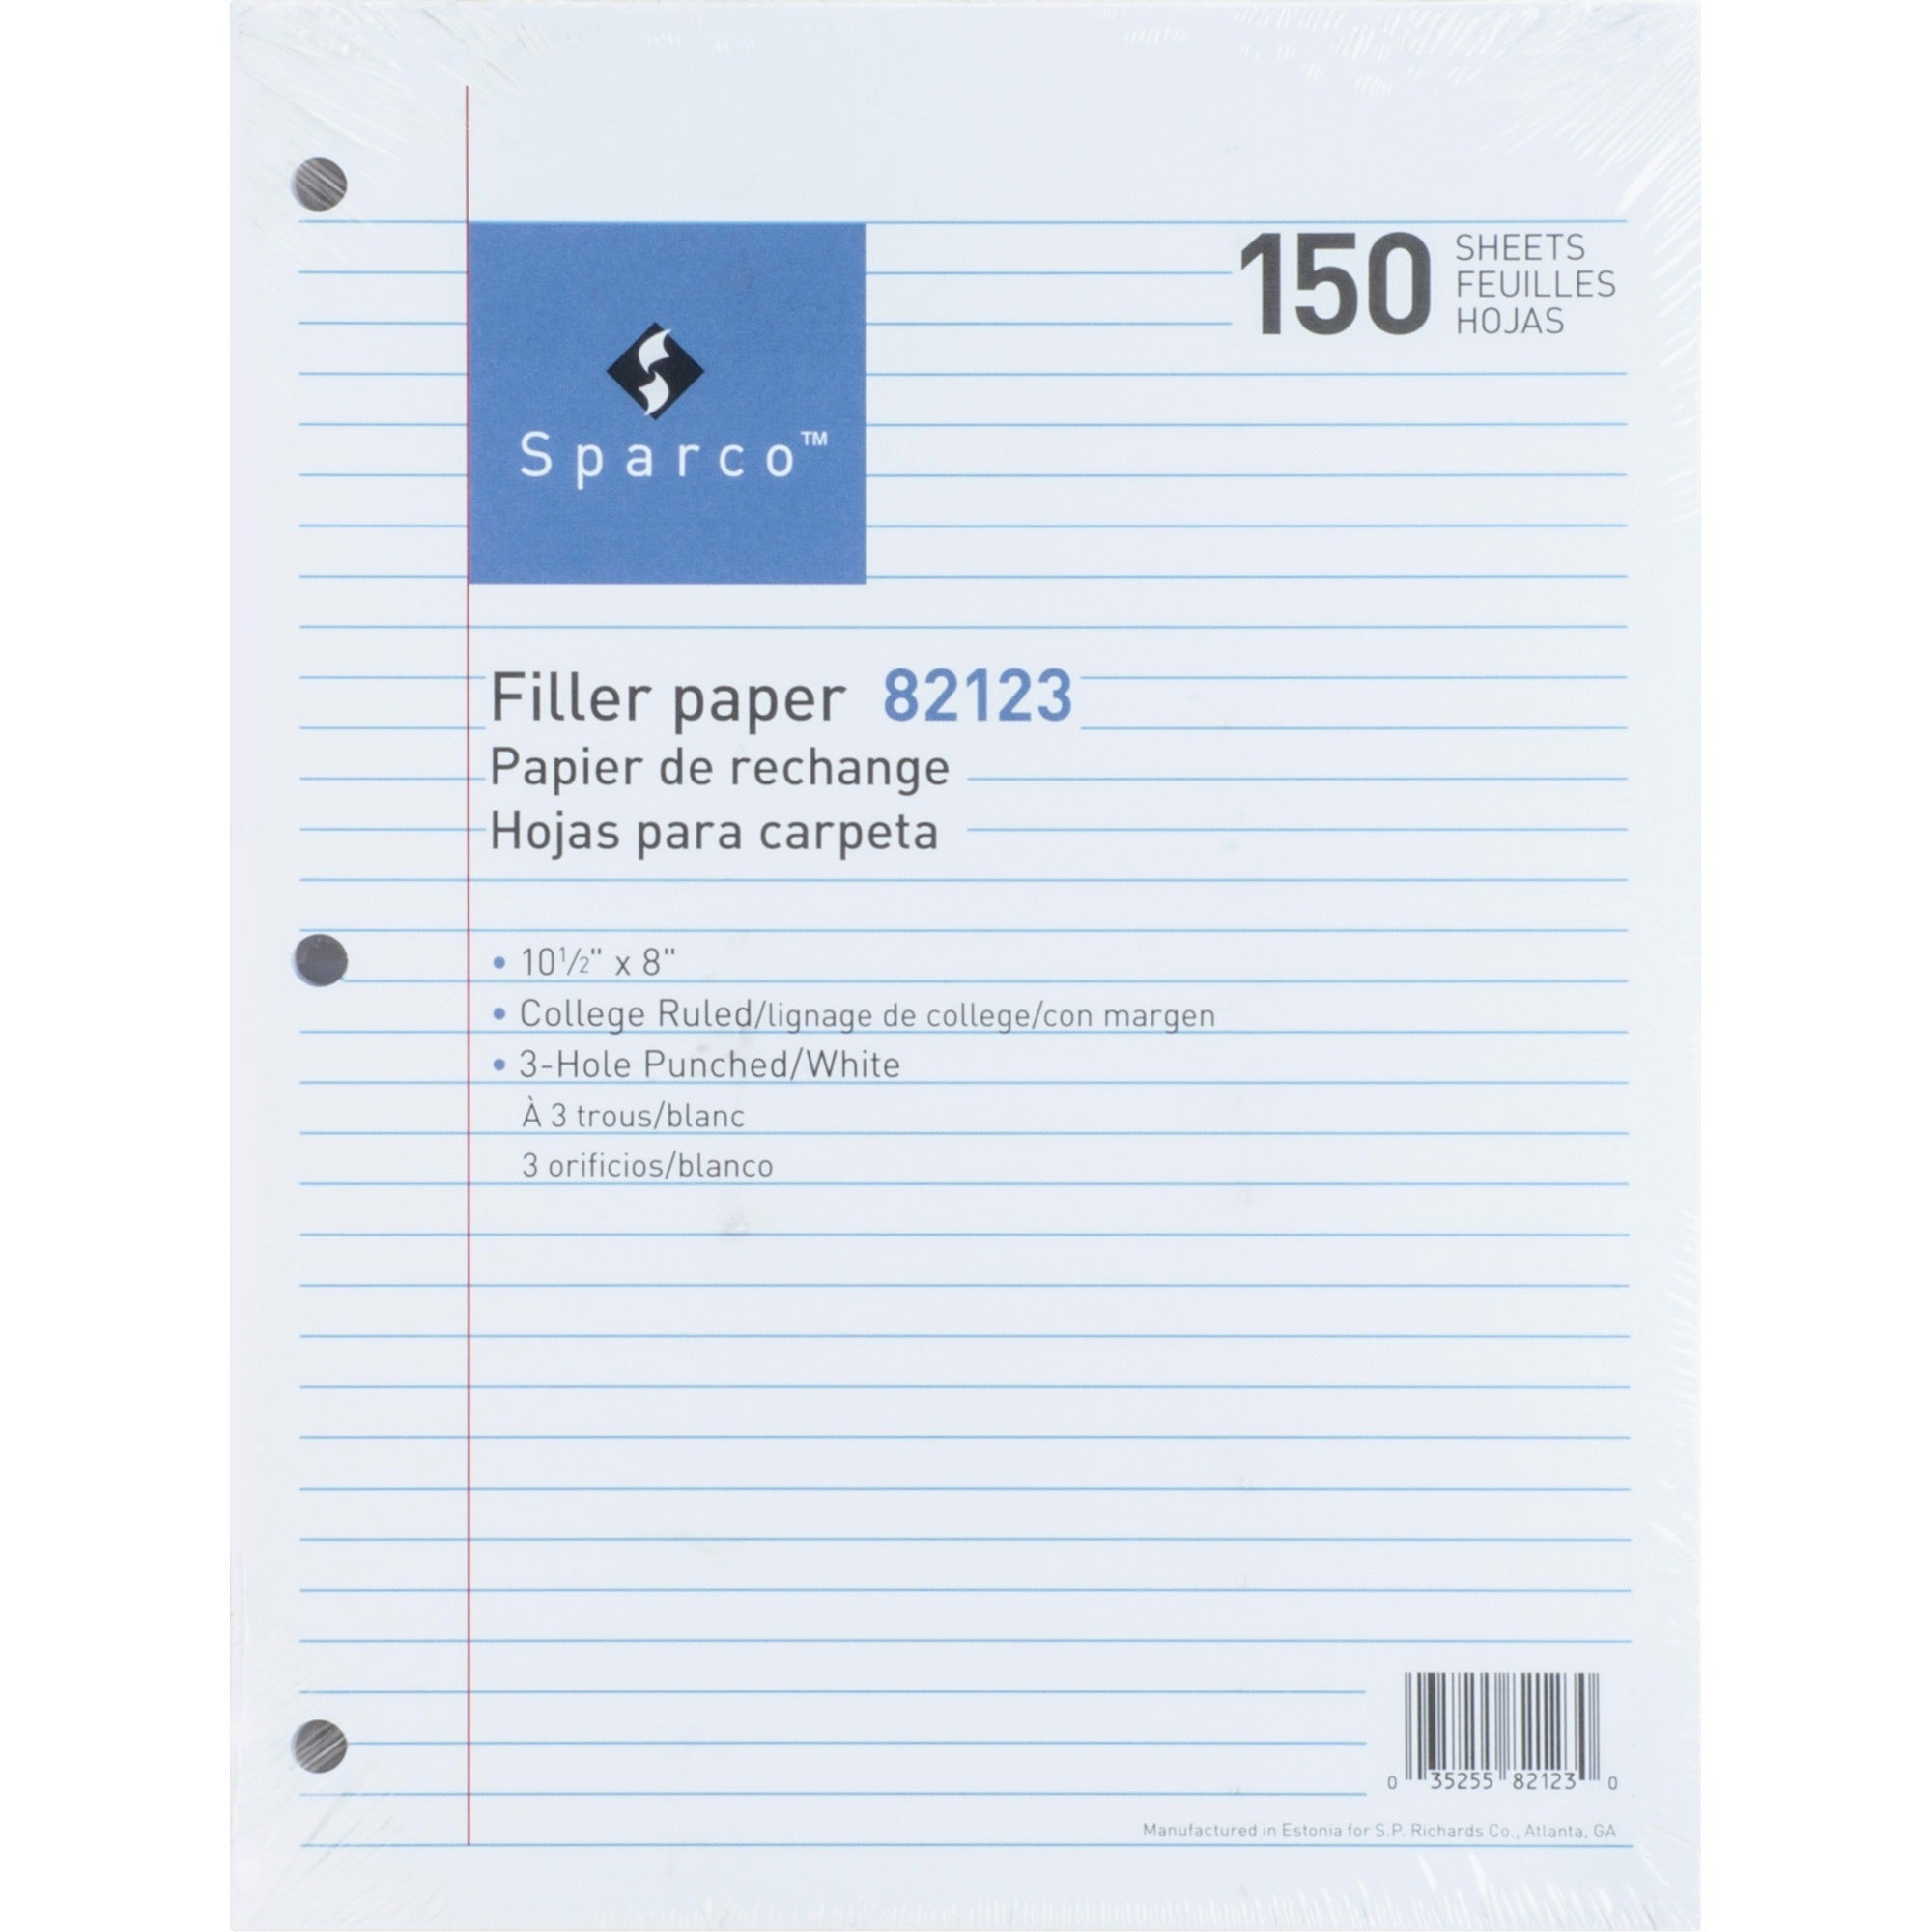 Sparco 3-hole Punched Filler Paper - 150 Sheets - College Ruled - Ruled Red Margin - 16 lb Basis Weight - 8" x 10 1/2" - White Paper - Bleed-free - 150 / Pack - 